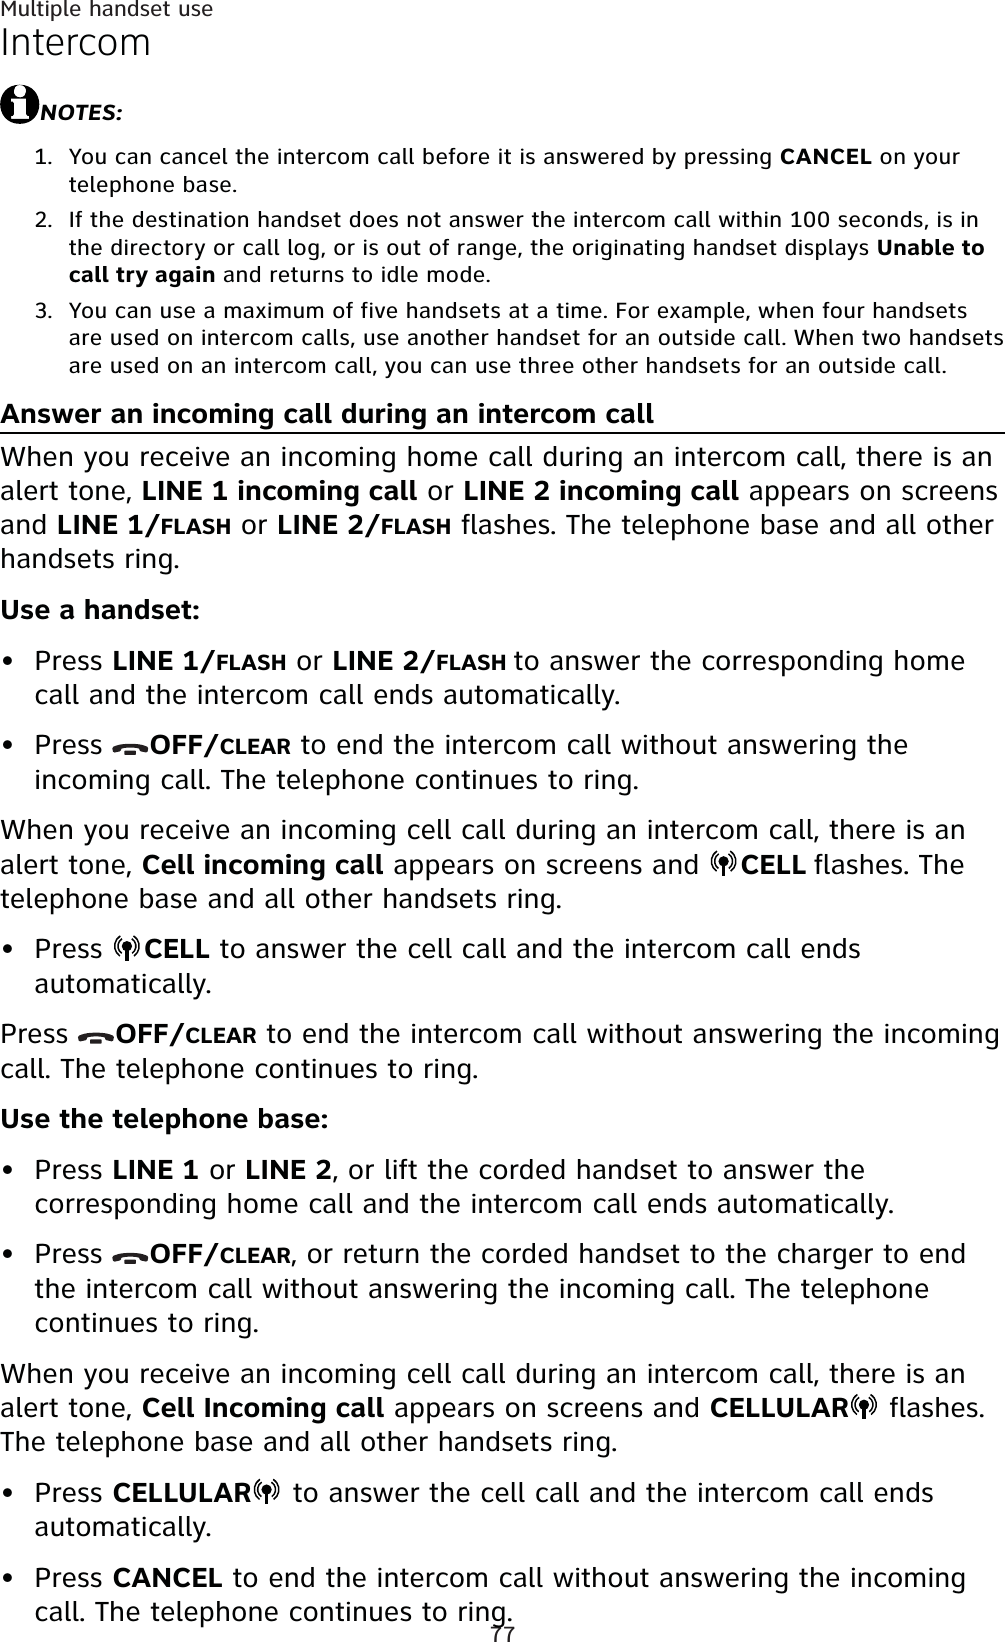 77Multiple handset useIntercomNOTES:You can cancel the intercom call before it is answered by pressing CANCEL on your telephone base.If the destination handset does not answer the intercom call within 100 seconds, is in the directory or call log, or is out of range, the originating handset displays Unable to call try again and returns to idle mode.You can use a maximum of five handsets at a time. For example, when four handsets are used on intercom calls, use another handset for an outside call. When two handsets are used on an intercom call, you can use three other handsets for an outside call.Answer an incoming call during an intercom callWhen you receive an incoming home call during an intercom call, there is an alert tone, LINE 1 incoming call or LINE 2 incoming call appears on screens and LINE 1/FLASH or LINE 2/FLASH flashes. The telephone base and all other handsets ring.Use a handset:Press LINE 1/FLASH or LINE 2/FLASH to answer the corresponding home call and the intercom call ends automatically.Press  OFF/CLEAR to end the intercom call without answering the incoming call. The telephone continues to ring.When you receive an incoming cell call during an intercom call, there is an alert tone, Cell incoming call appears on screens and  CELL flashes. The telephone base and all other handsets ring.Press  CELL to answer the cell call and the intercom call ends automatically.Press  OFF/CLEAR to end the intercom call without answering the incoming call. The telephone continues to ring.Use the telephone base:Press LINE 1 or LINE 2, or lift the corded handset to answer the corresponding home call and the intercom call ends automatically.Press  OFF/CLEAR, or return the corded handset to the charger to end the intercom call without answering the incoming call. The telephone continues to ring.When you receive an incoming cell call during an intercom call, there is an alert tone, Cell Incoming call appears on screens and CELLULAR flashes.The telephone base and all other handsets ring.Press CELLULAR  to answer the cell call and the intercom call ends automatically.Press CANCEL to end the intercom call without answering the incoming call. The telephone continues to ring.1.2.3.•••••••